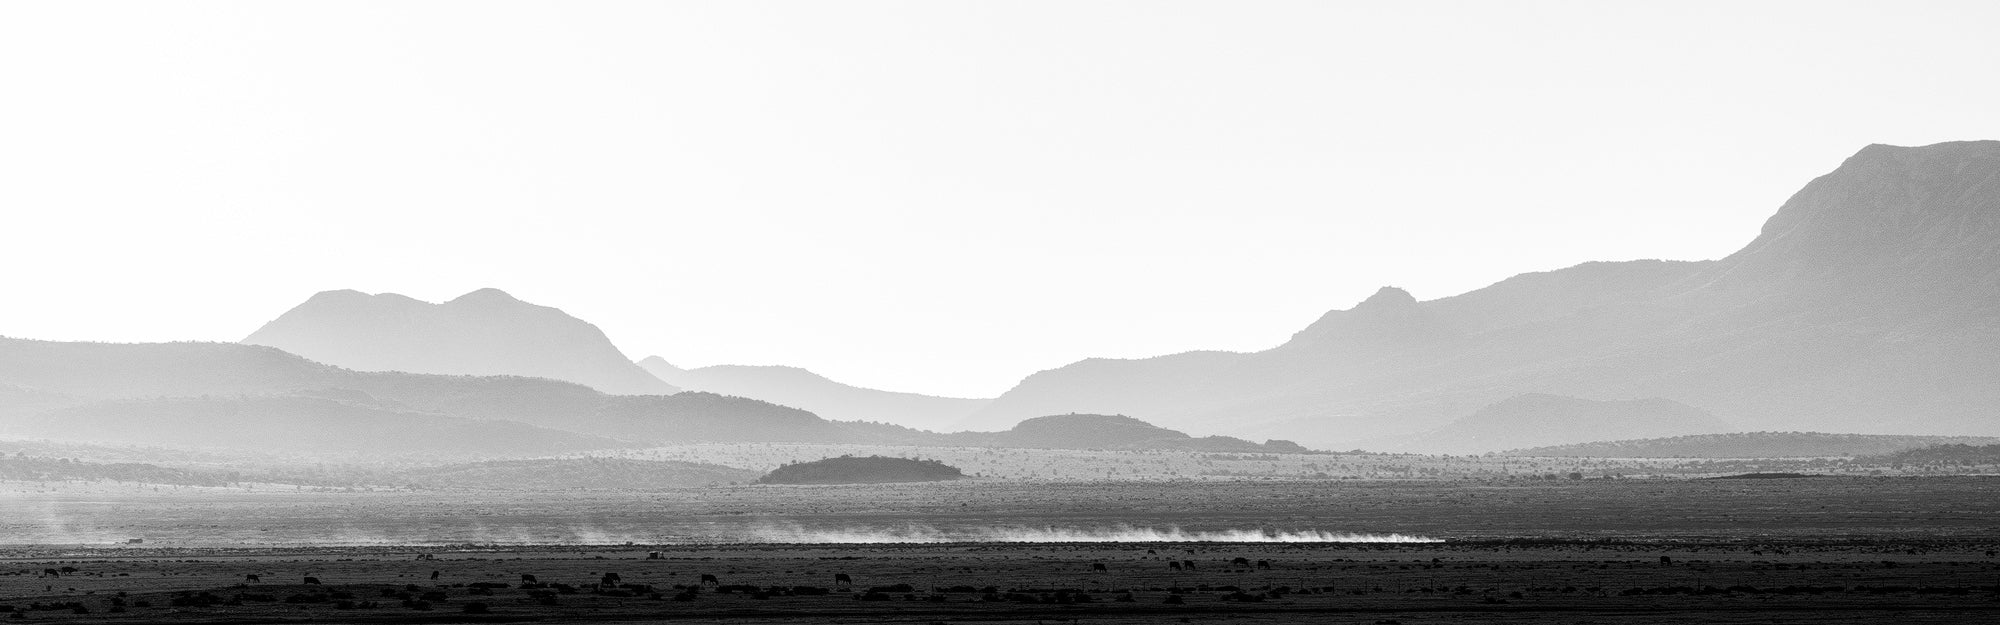 Desert Crossing: Black and White Landscape Photograph by Keith Dotson. 